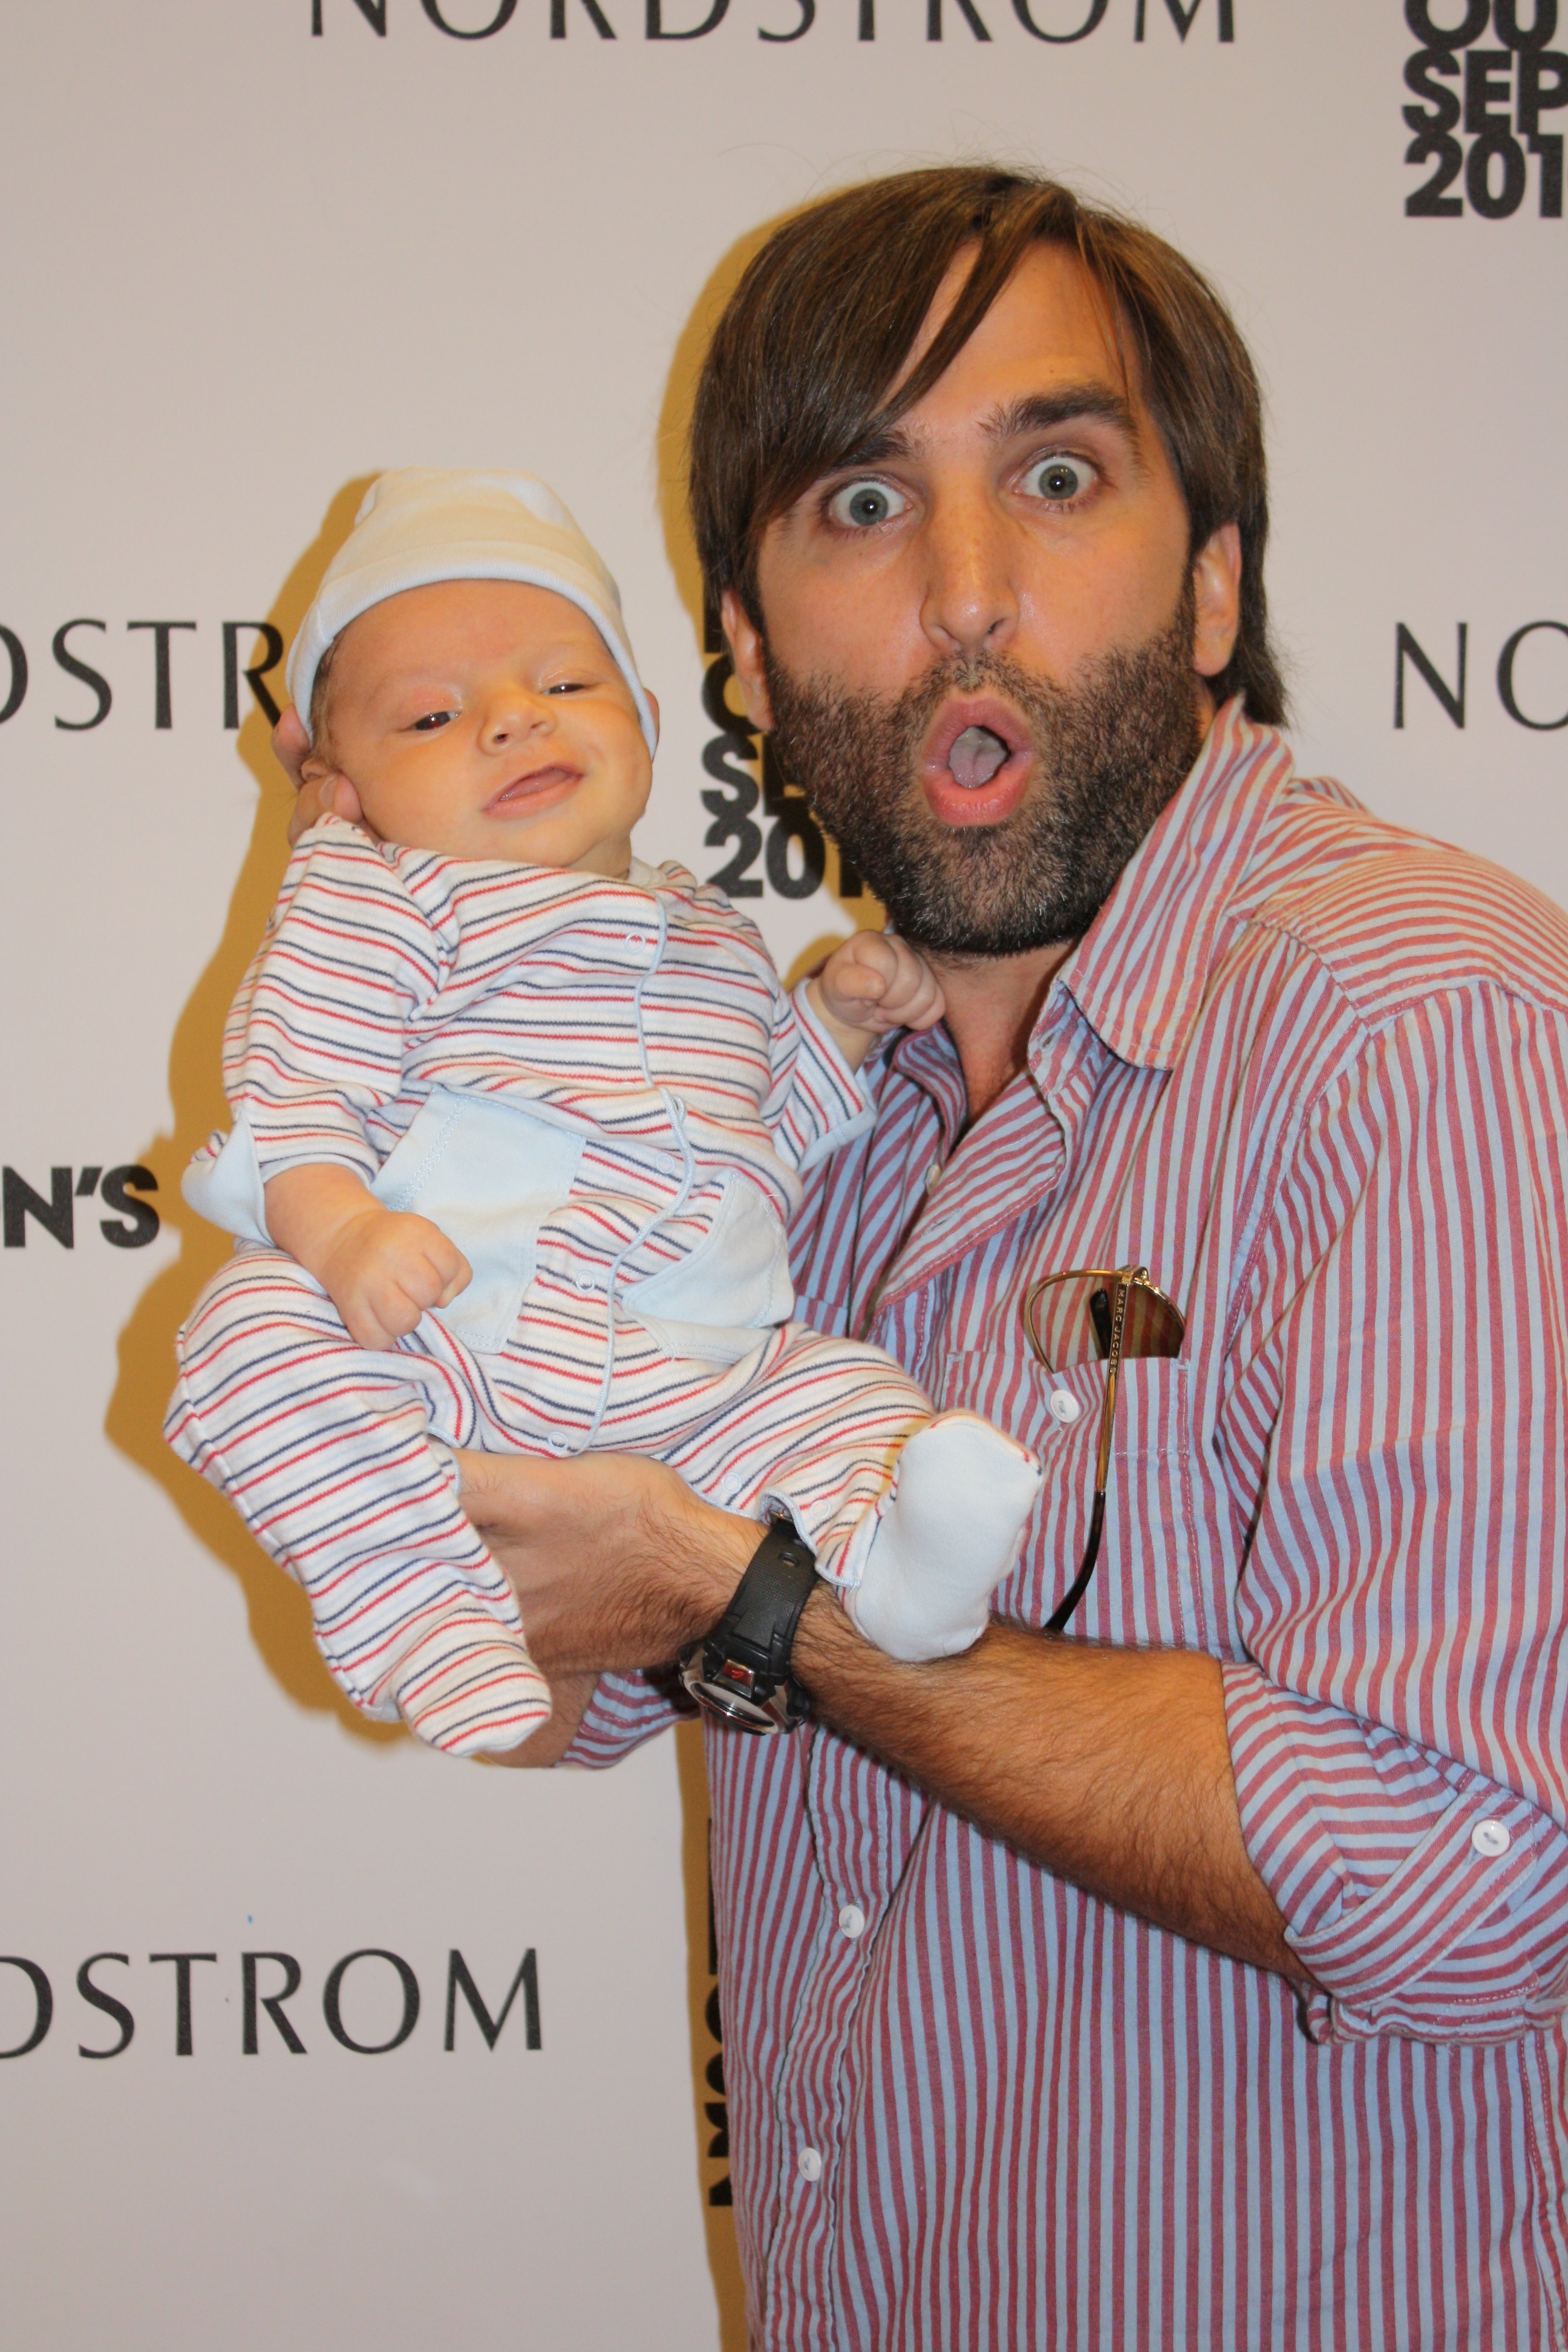 Mike Hatton and his son, Griffin, attend the Nordstrom Fashion's Night Out L.A. at The Grove.